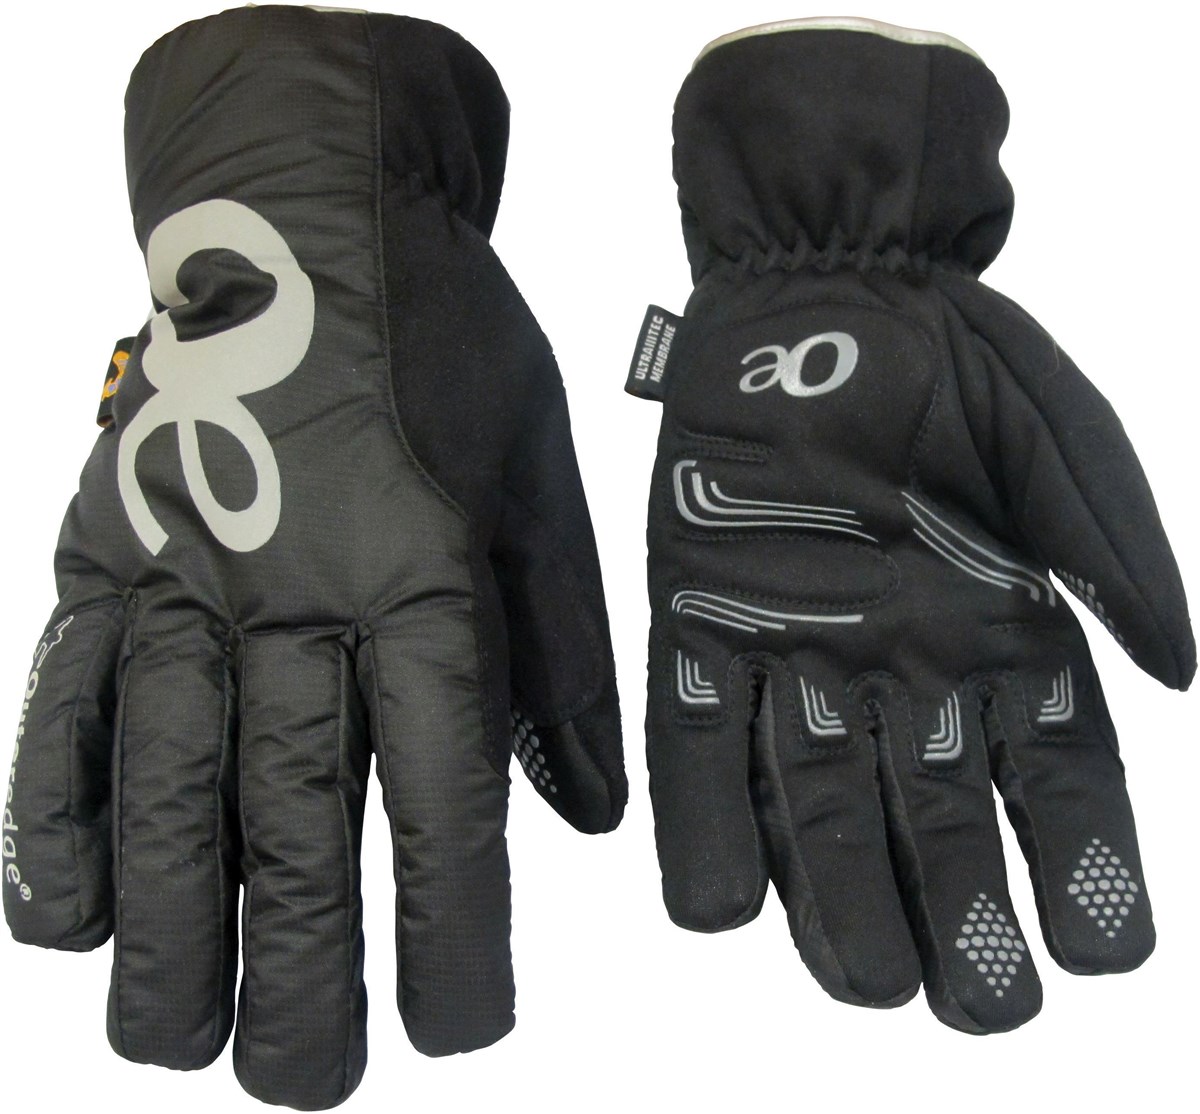 Outeredge Aerotex Winter Reflective Long Finger Gloves